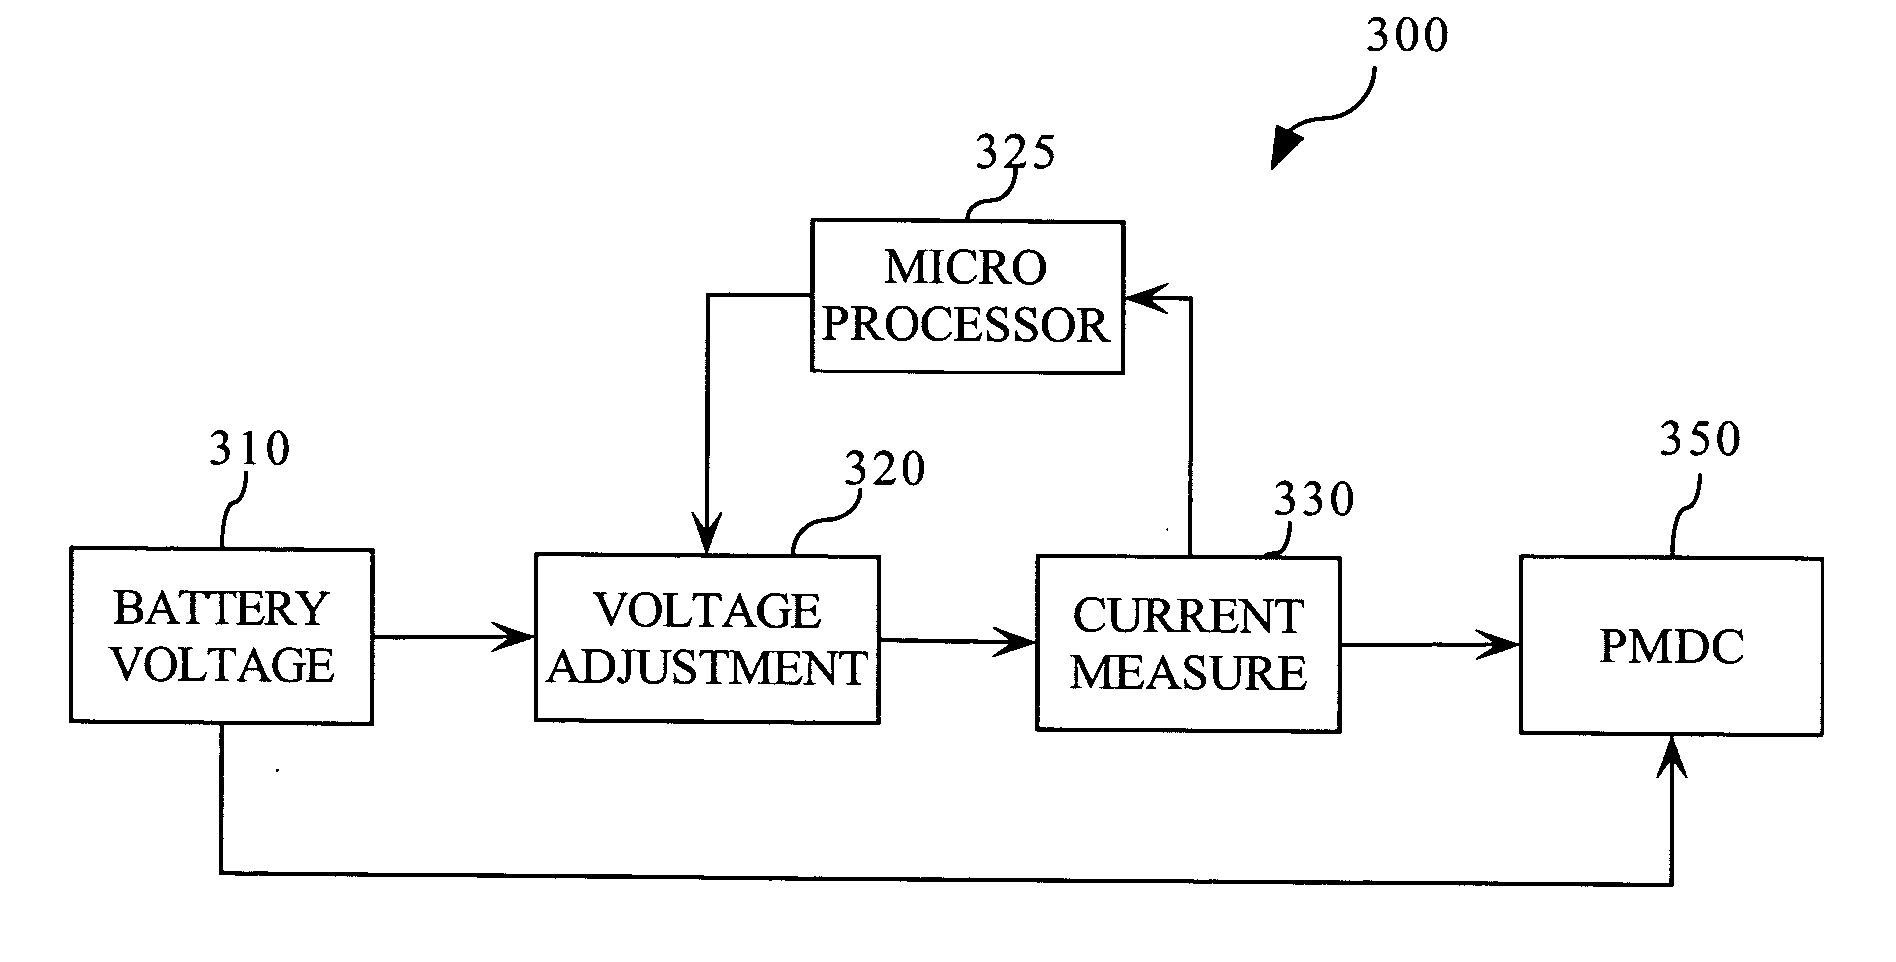 Amperage control for protection of battery over current in power tools